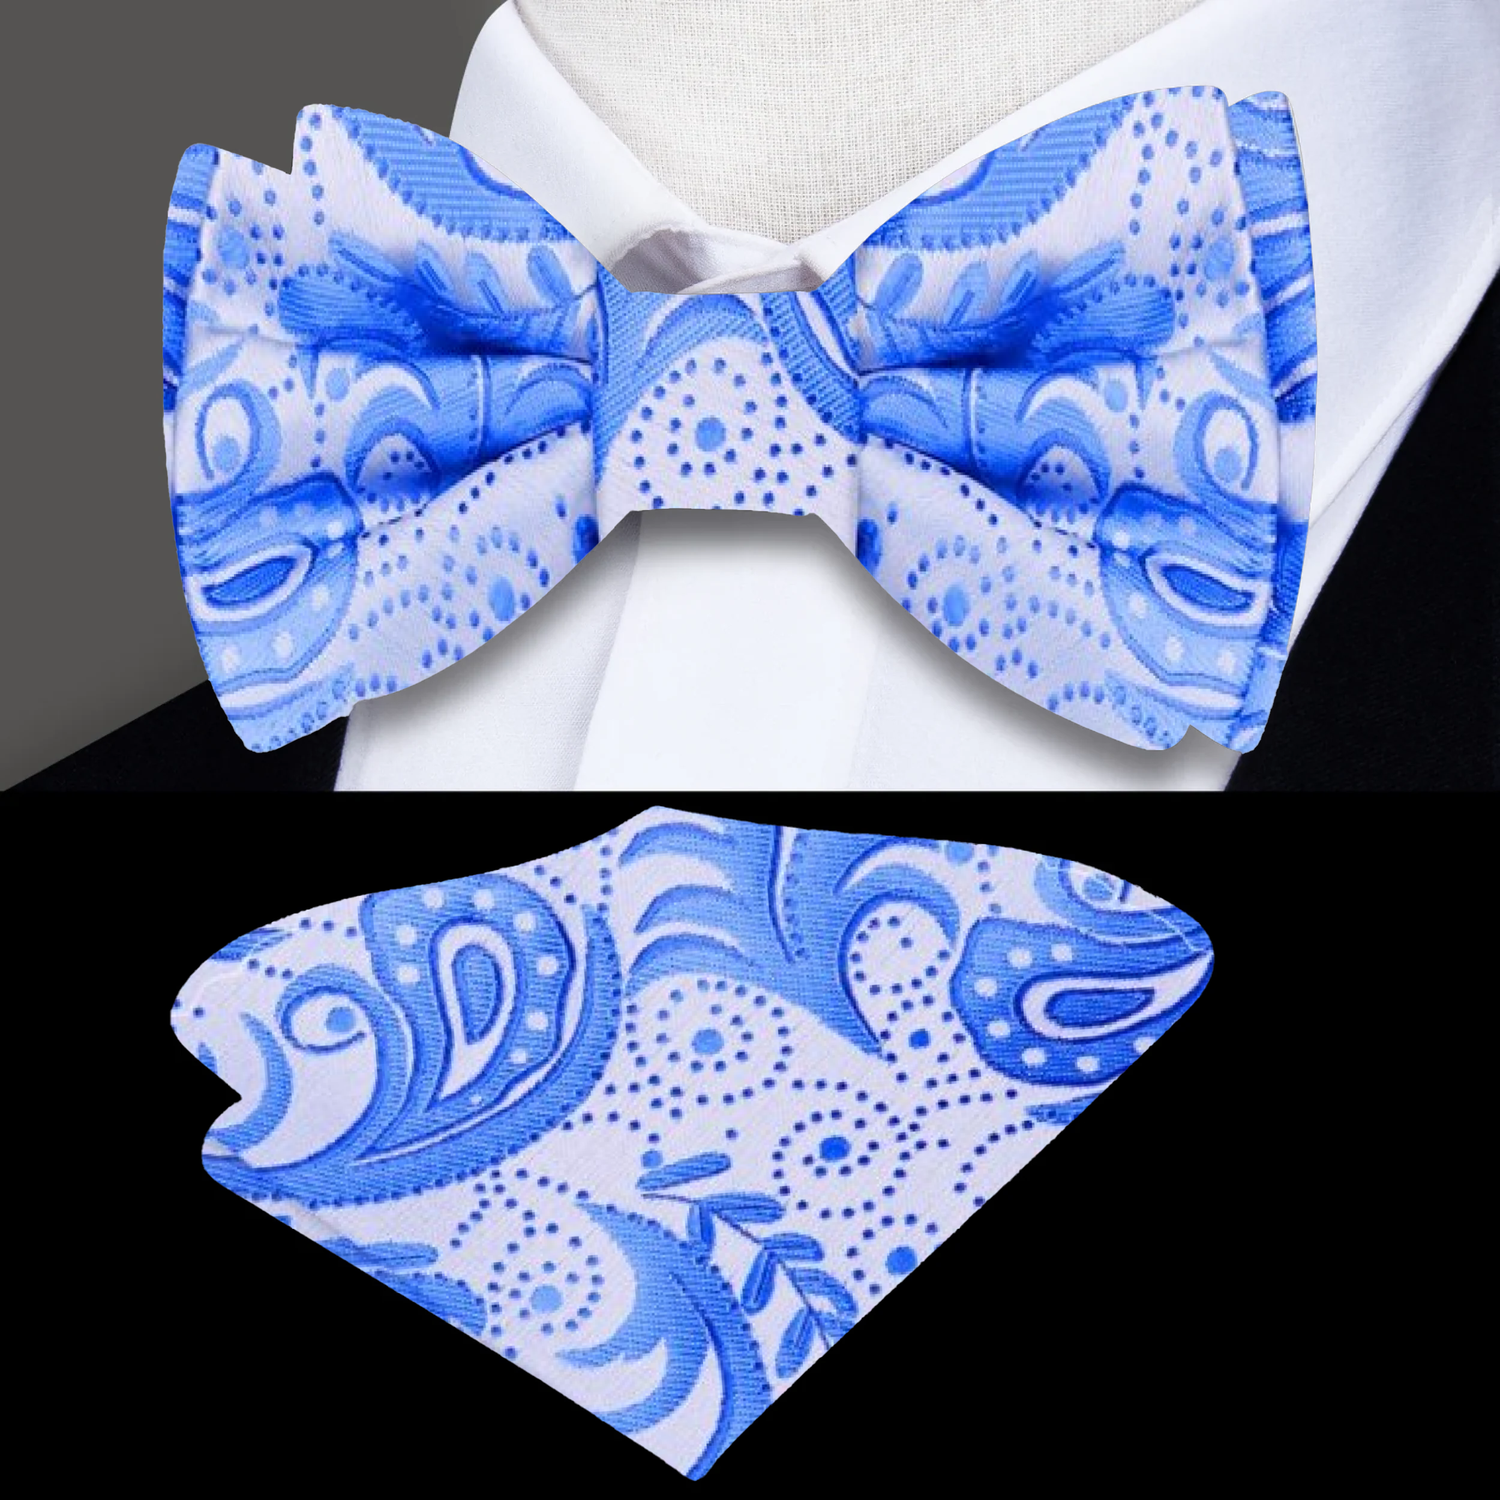 A Light Blue Paisley Pattern Silk Self Tie Bow Tie, Matching Pocket Square||Blue